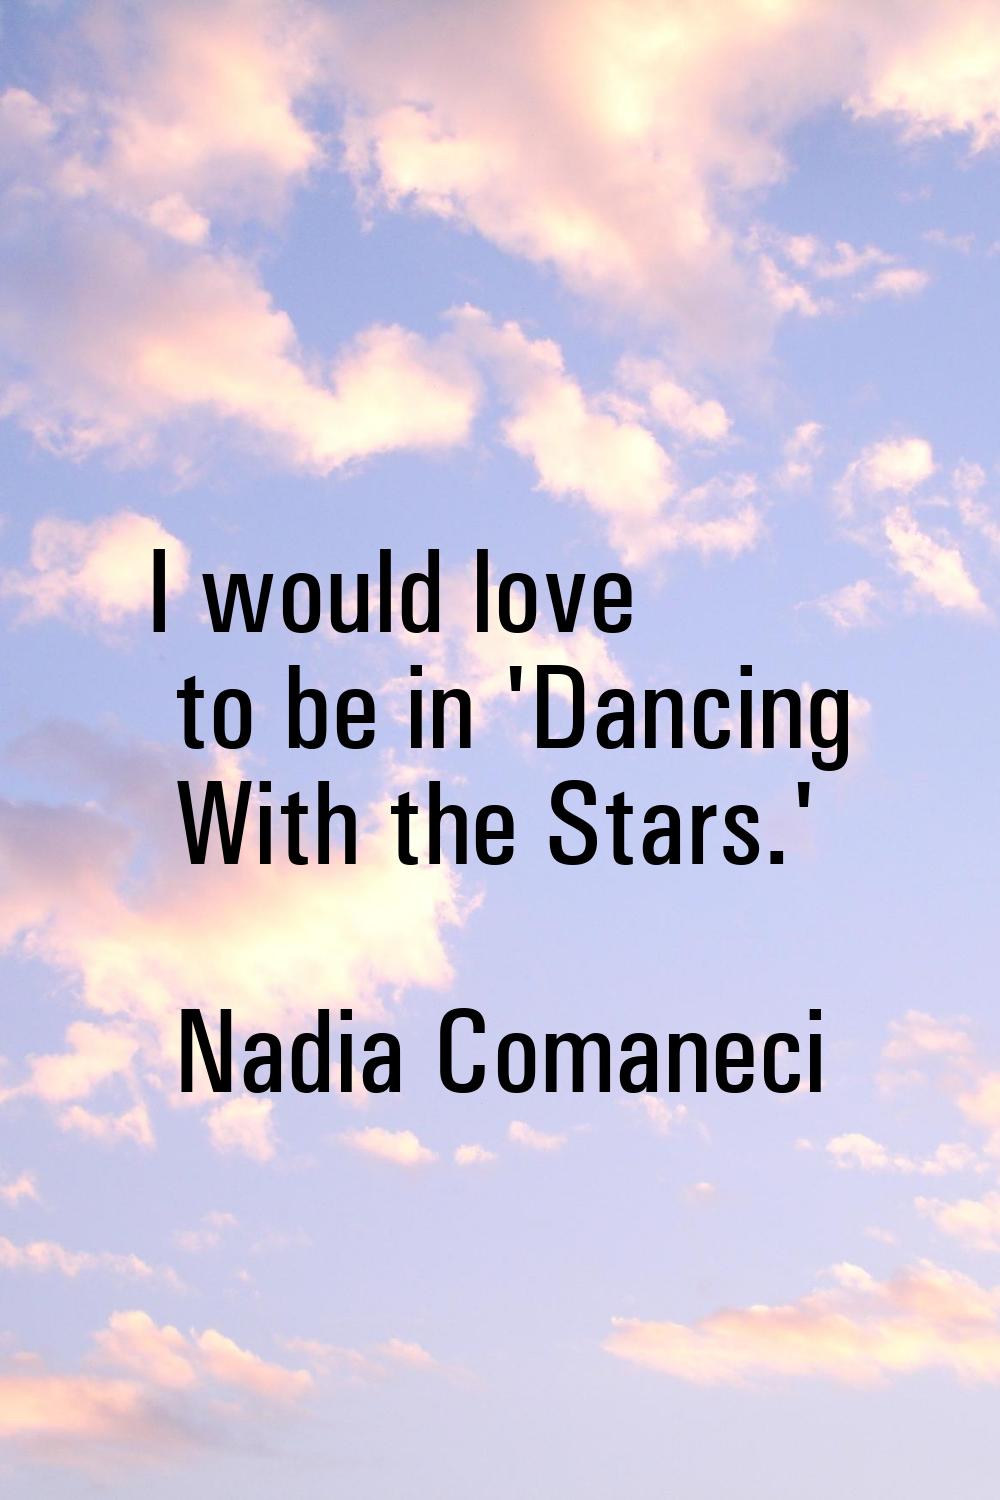 I would love to be in 'Dancing With the Stars.'